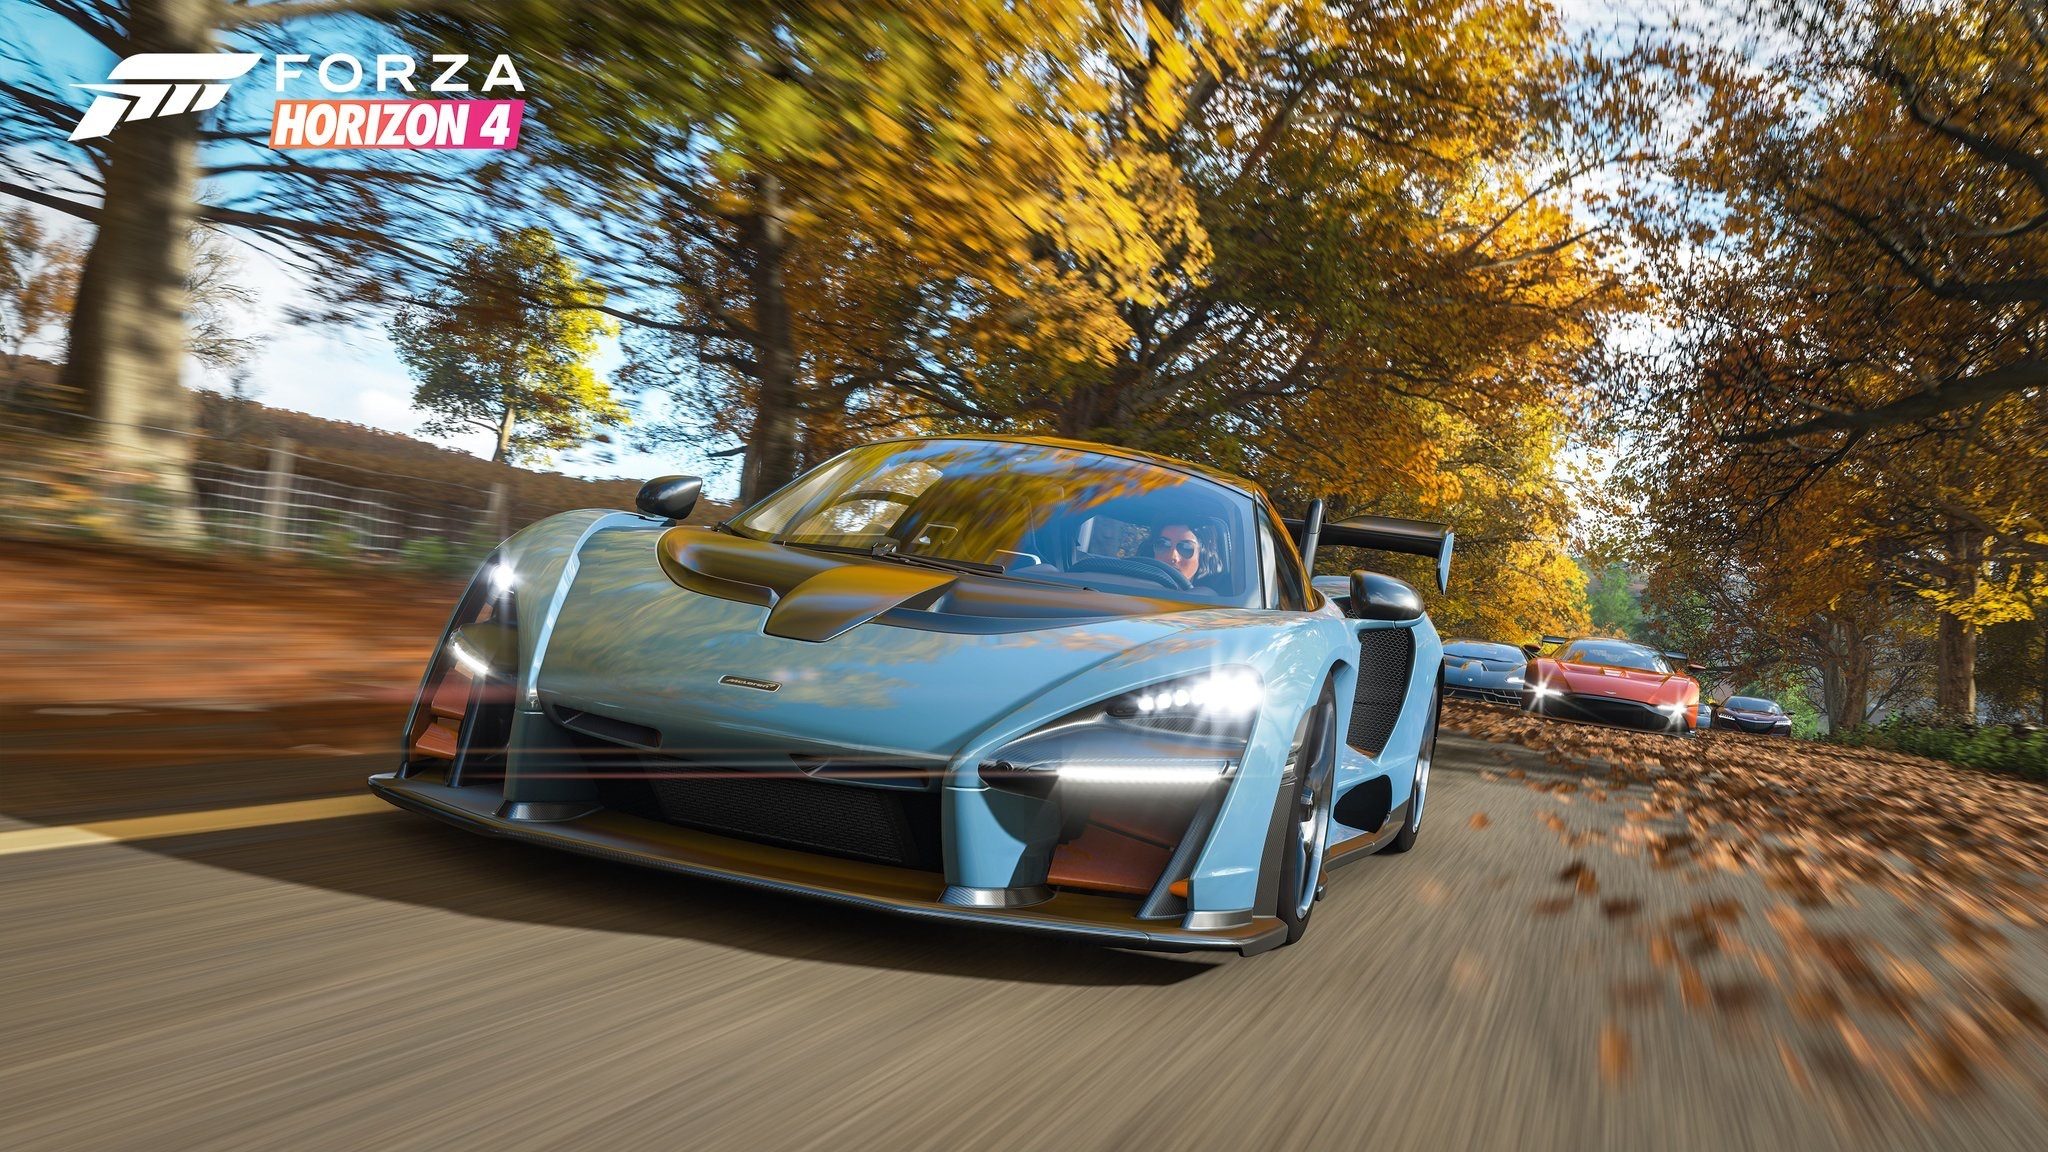 I Learned How to Drive in the UK by Playing Forza Horizon 4 - CNET